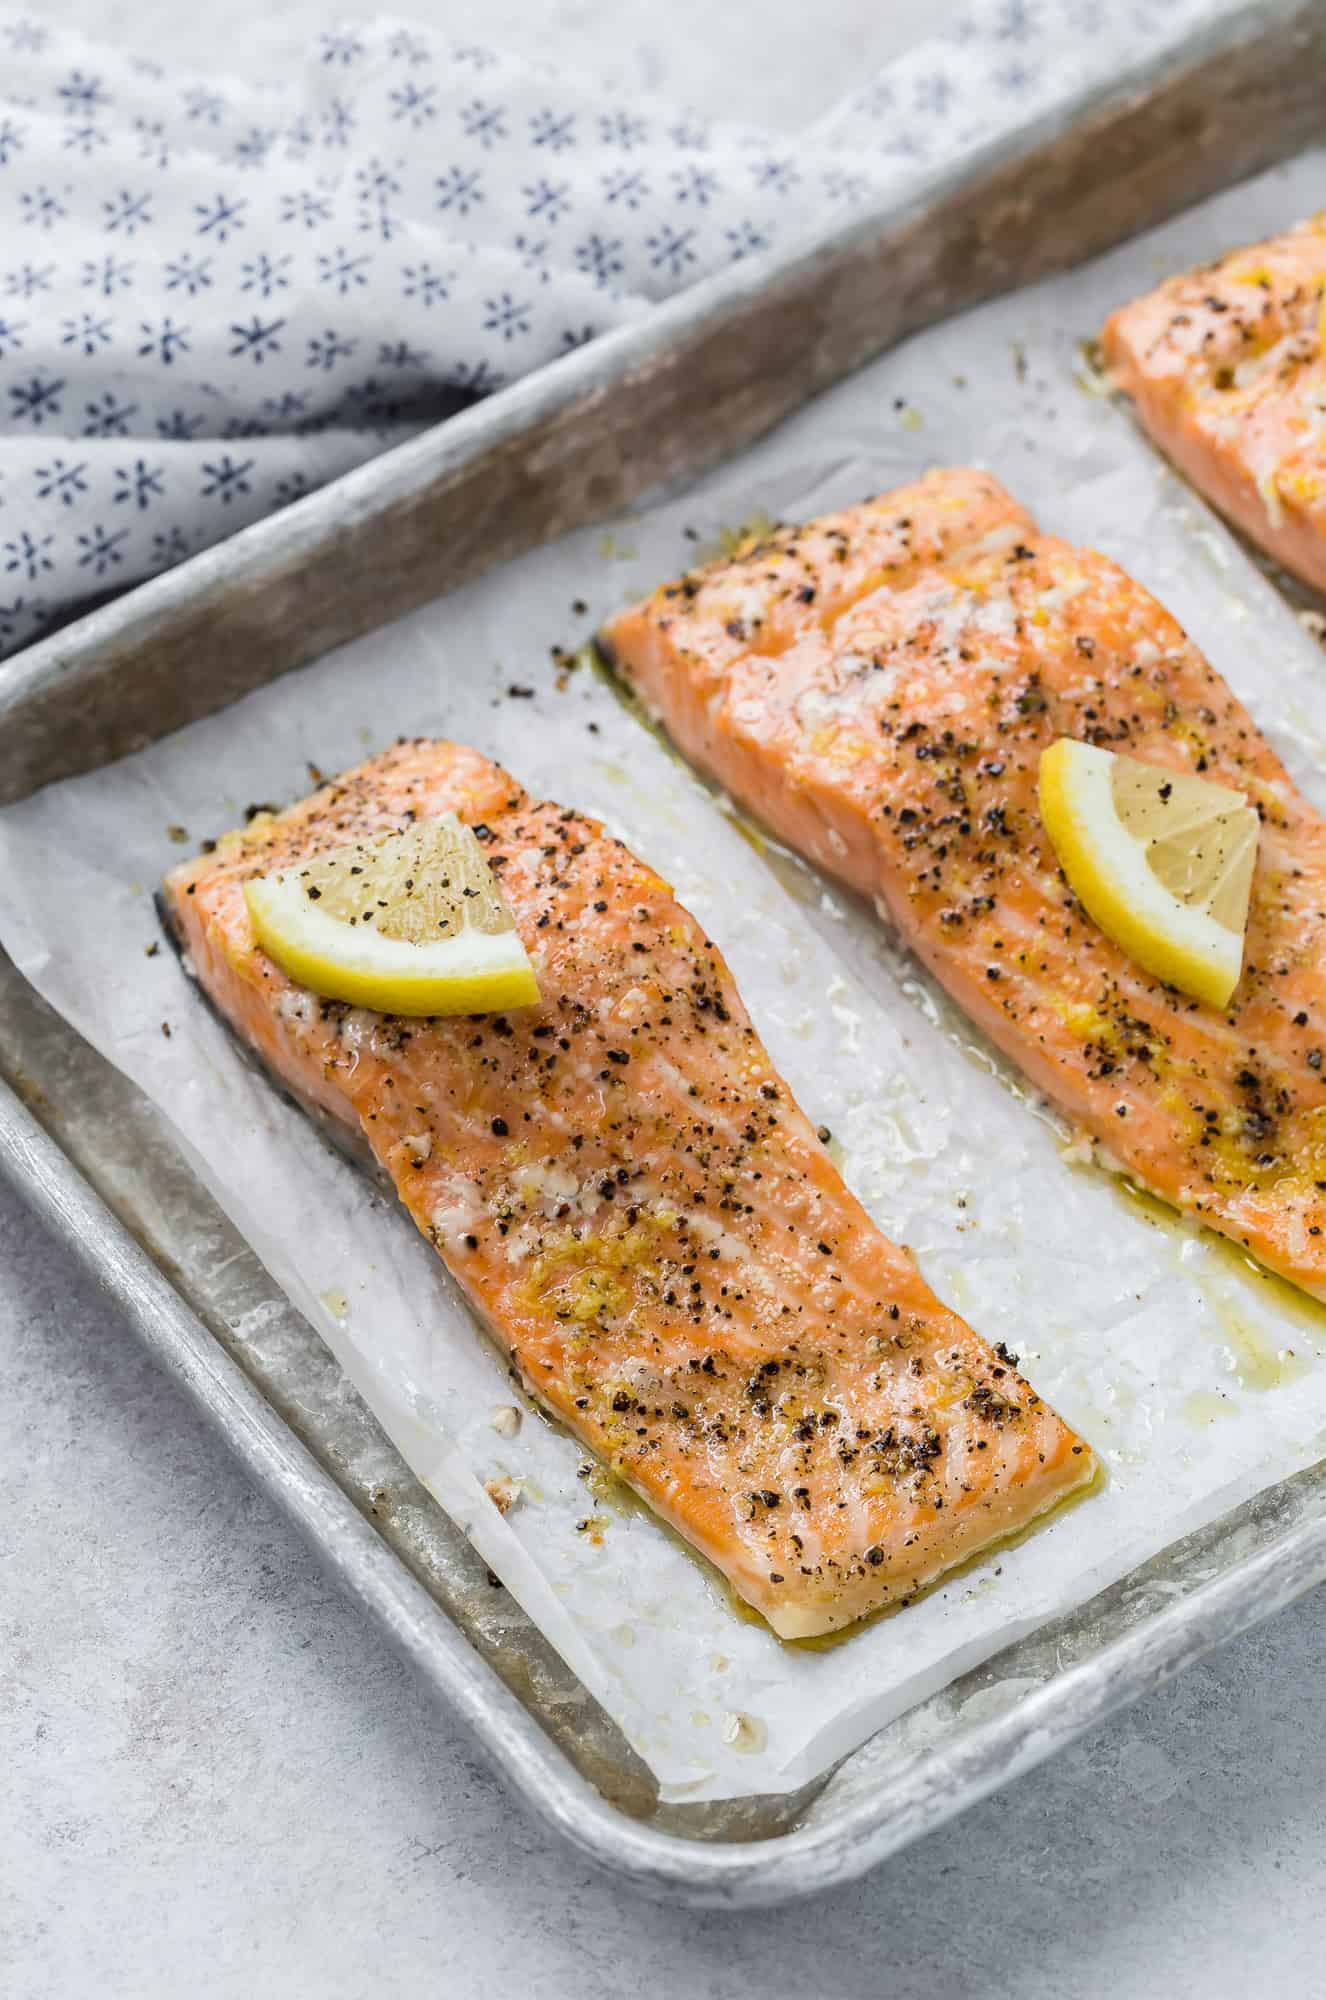 Slow roasted salmon on a parchment paper lined baking sheet.